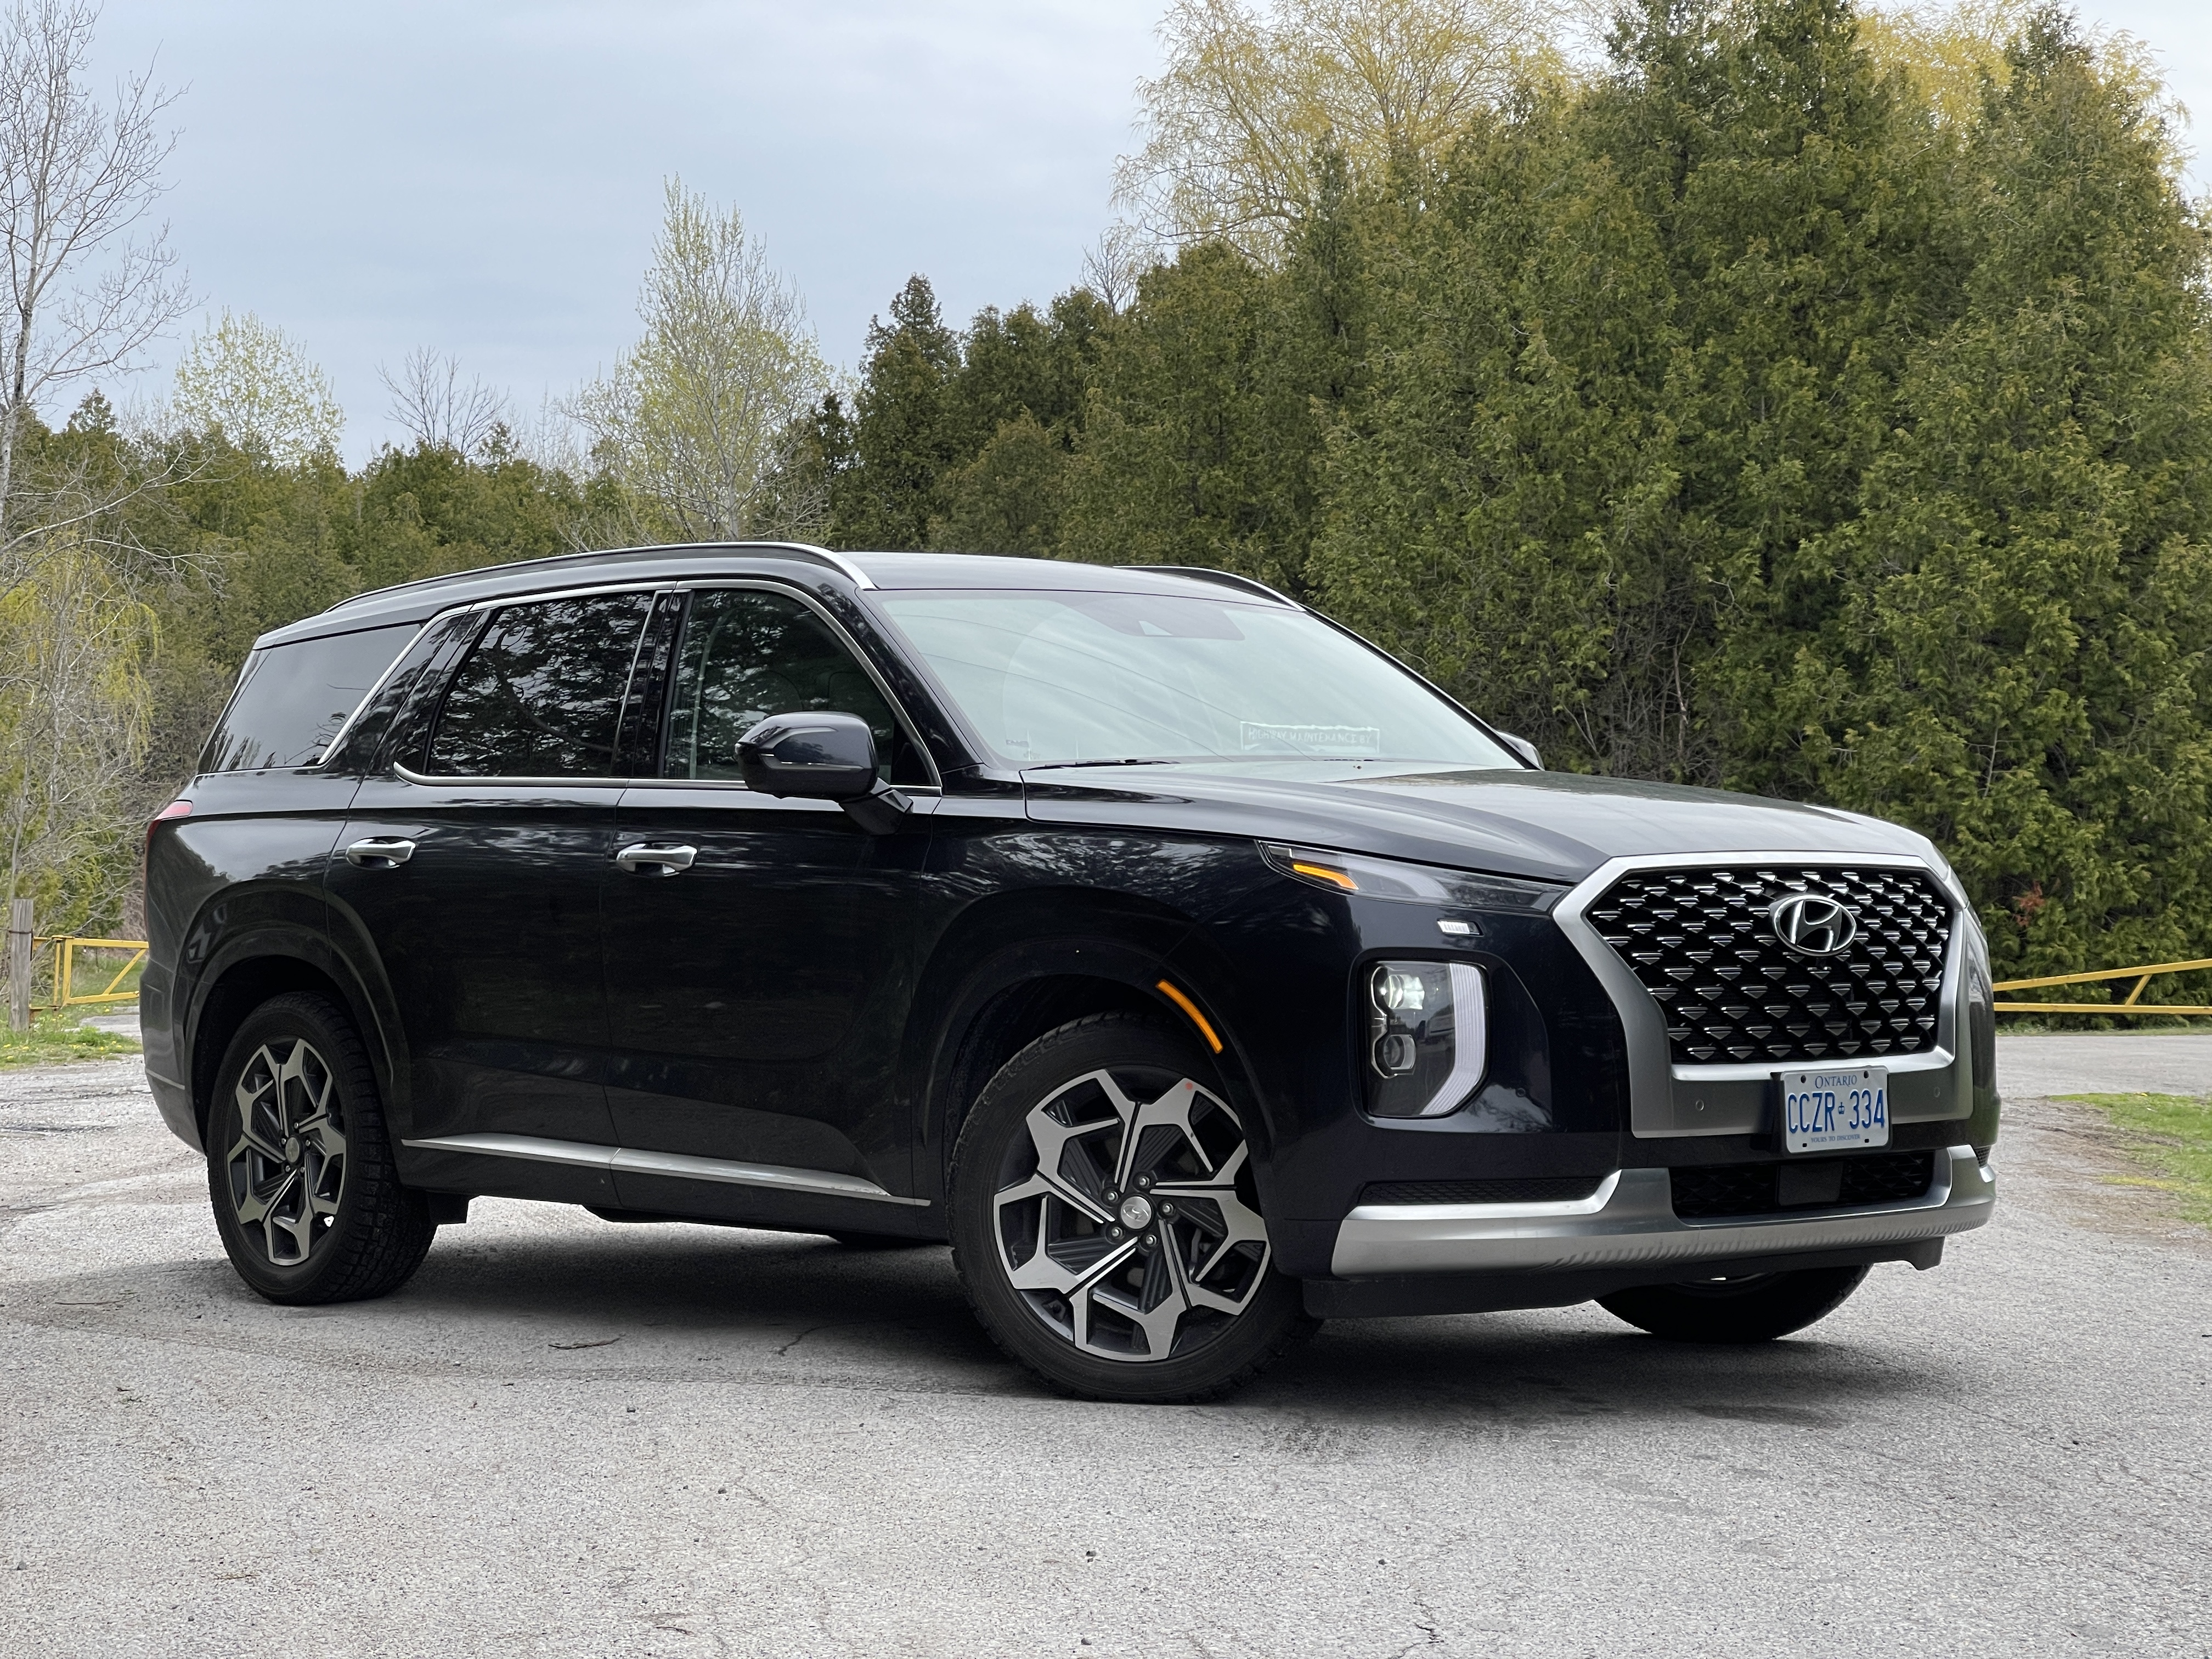 Review: The 2021 Kia Telluride vs. the 2021 Hyundai Palisade: Which SUV  gives you better value for money? - The Globe and Mail